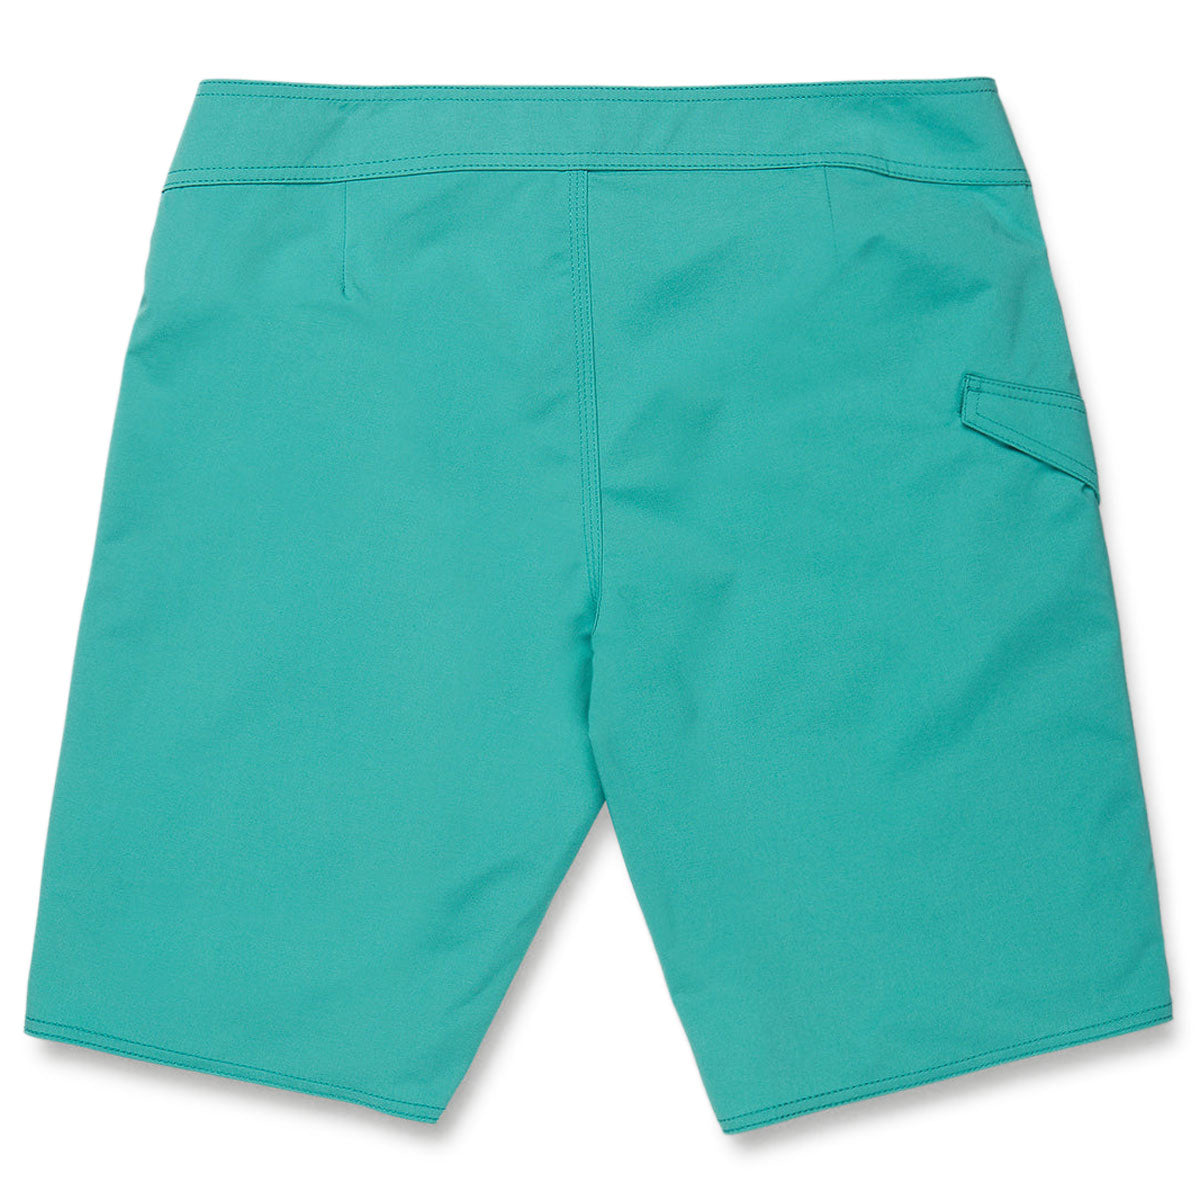 Volcom Lido Solid Mod 20 Shorts - Temple Teal image 2